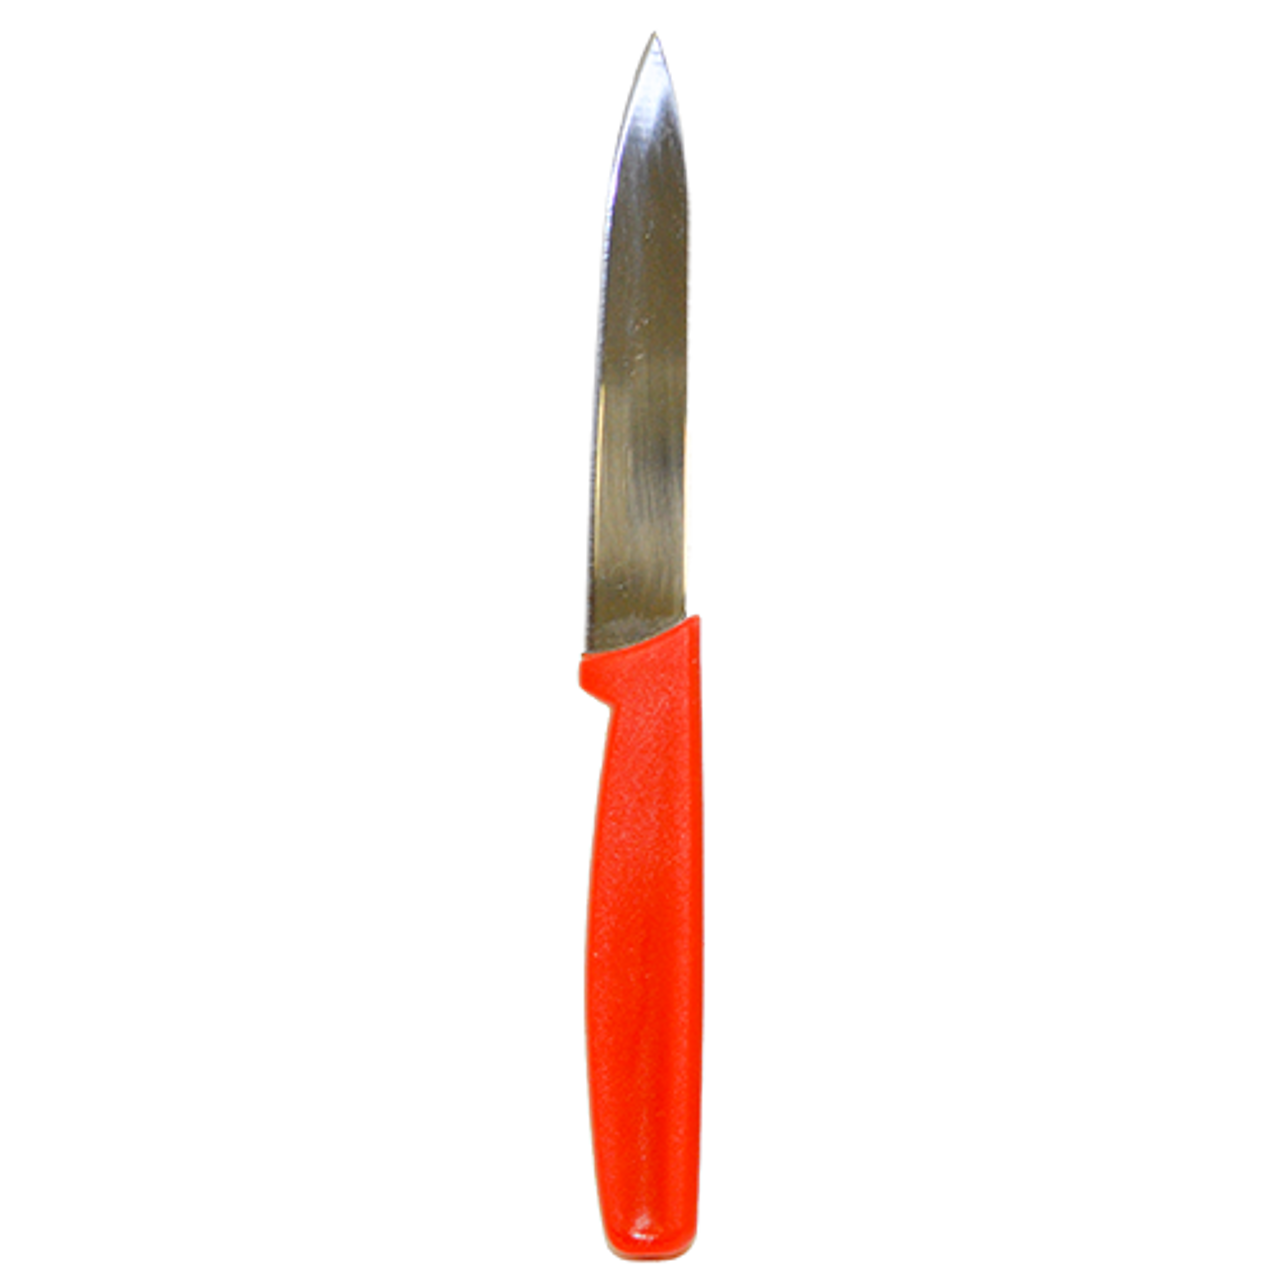 Paring Knife 4 in